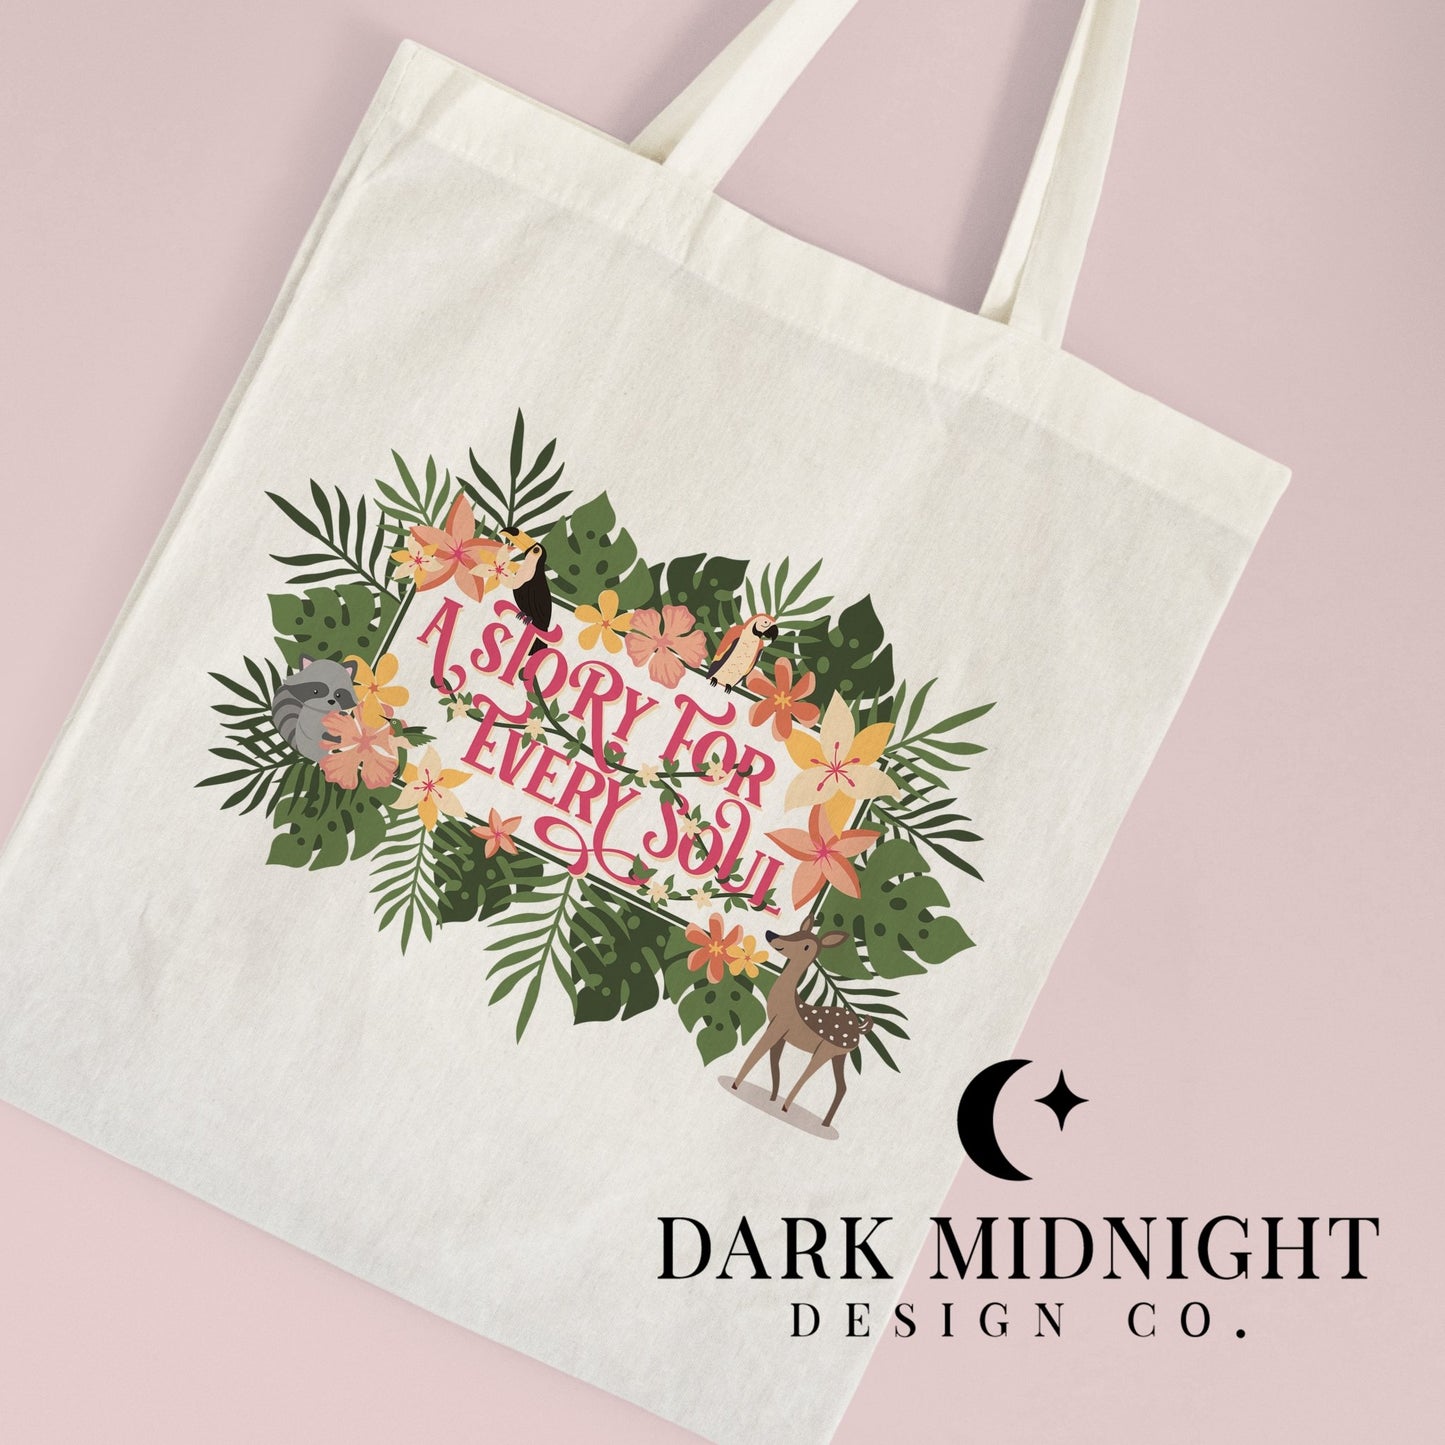 Pemberley Books Mural Tote - Officially Licensed Queen's Cove Series - Dark Midnight Design Co